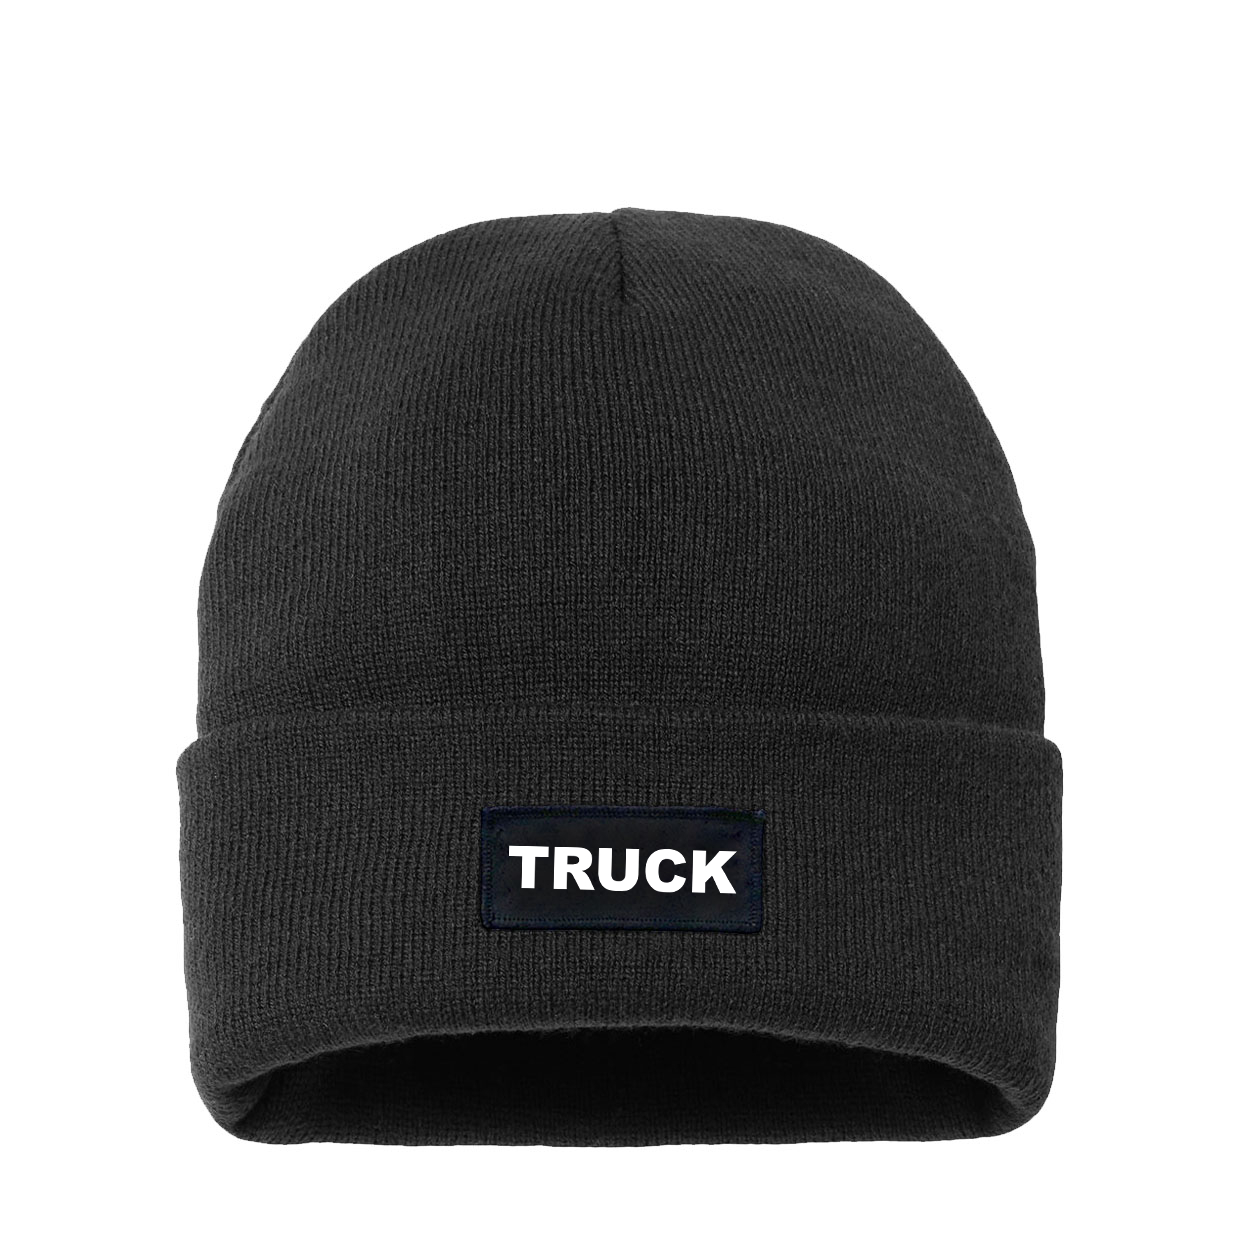 Truck Brand Logo Night Out Woven Patch Night Out Sherpa Lined Cuffed Beanie Black